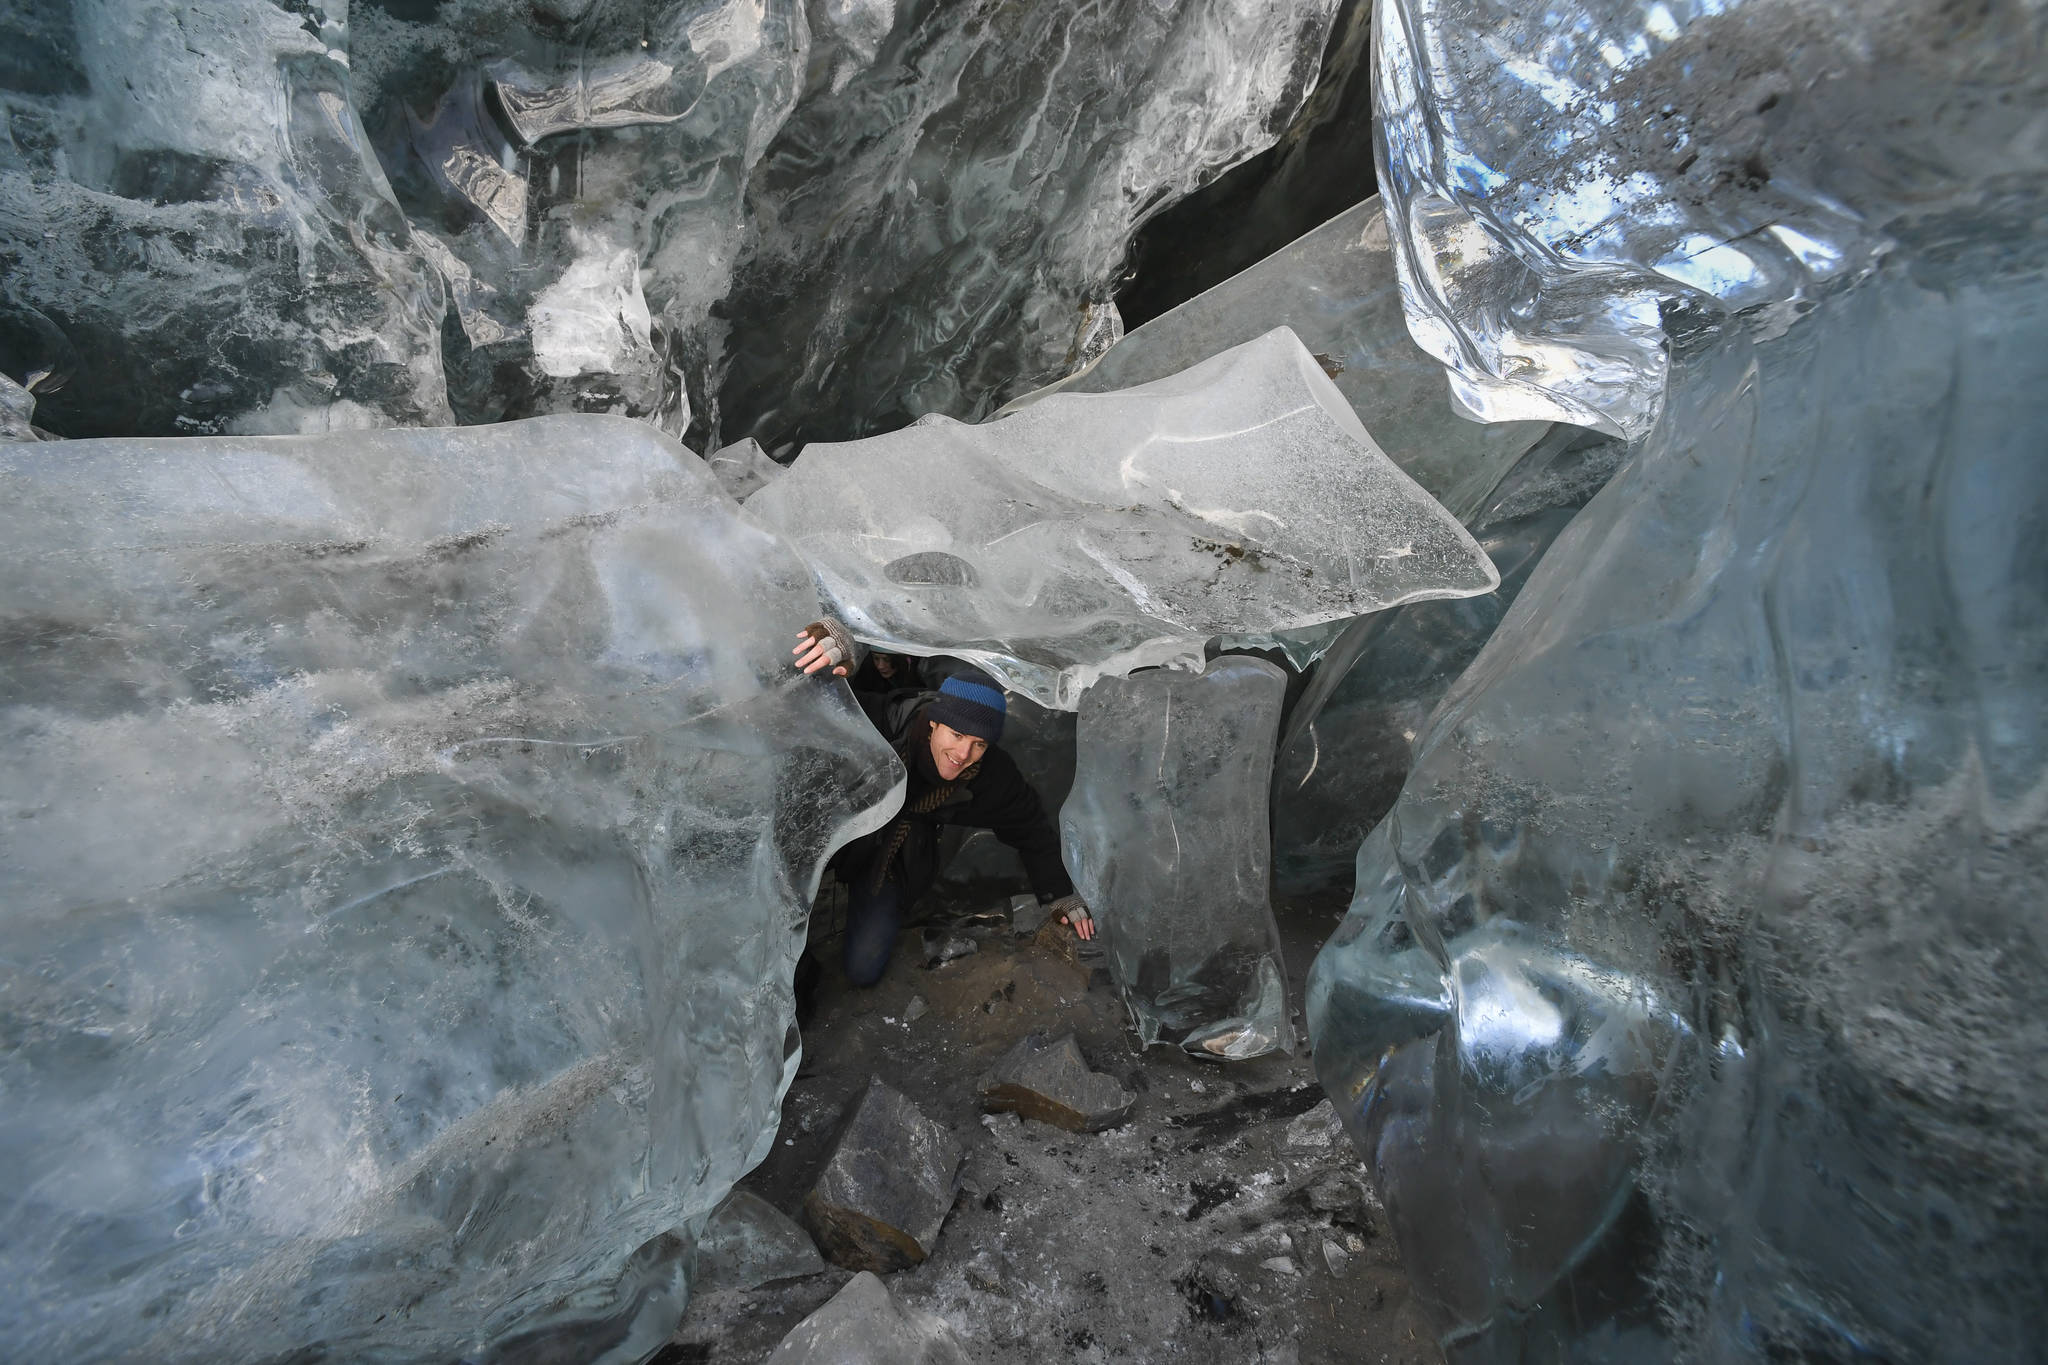 Salmon Thompson makes his way through a jumble of ice block at the entrance of an ice cave at the Mendenhall Glacier on Monday, Feb. 11, 2019. (Michael Penn | Juneau Empire)